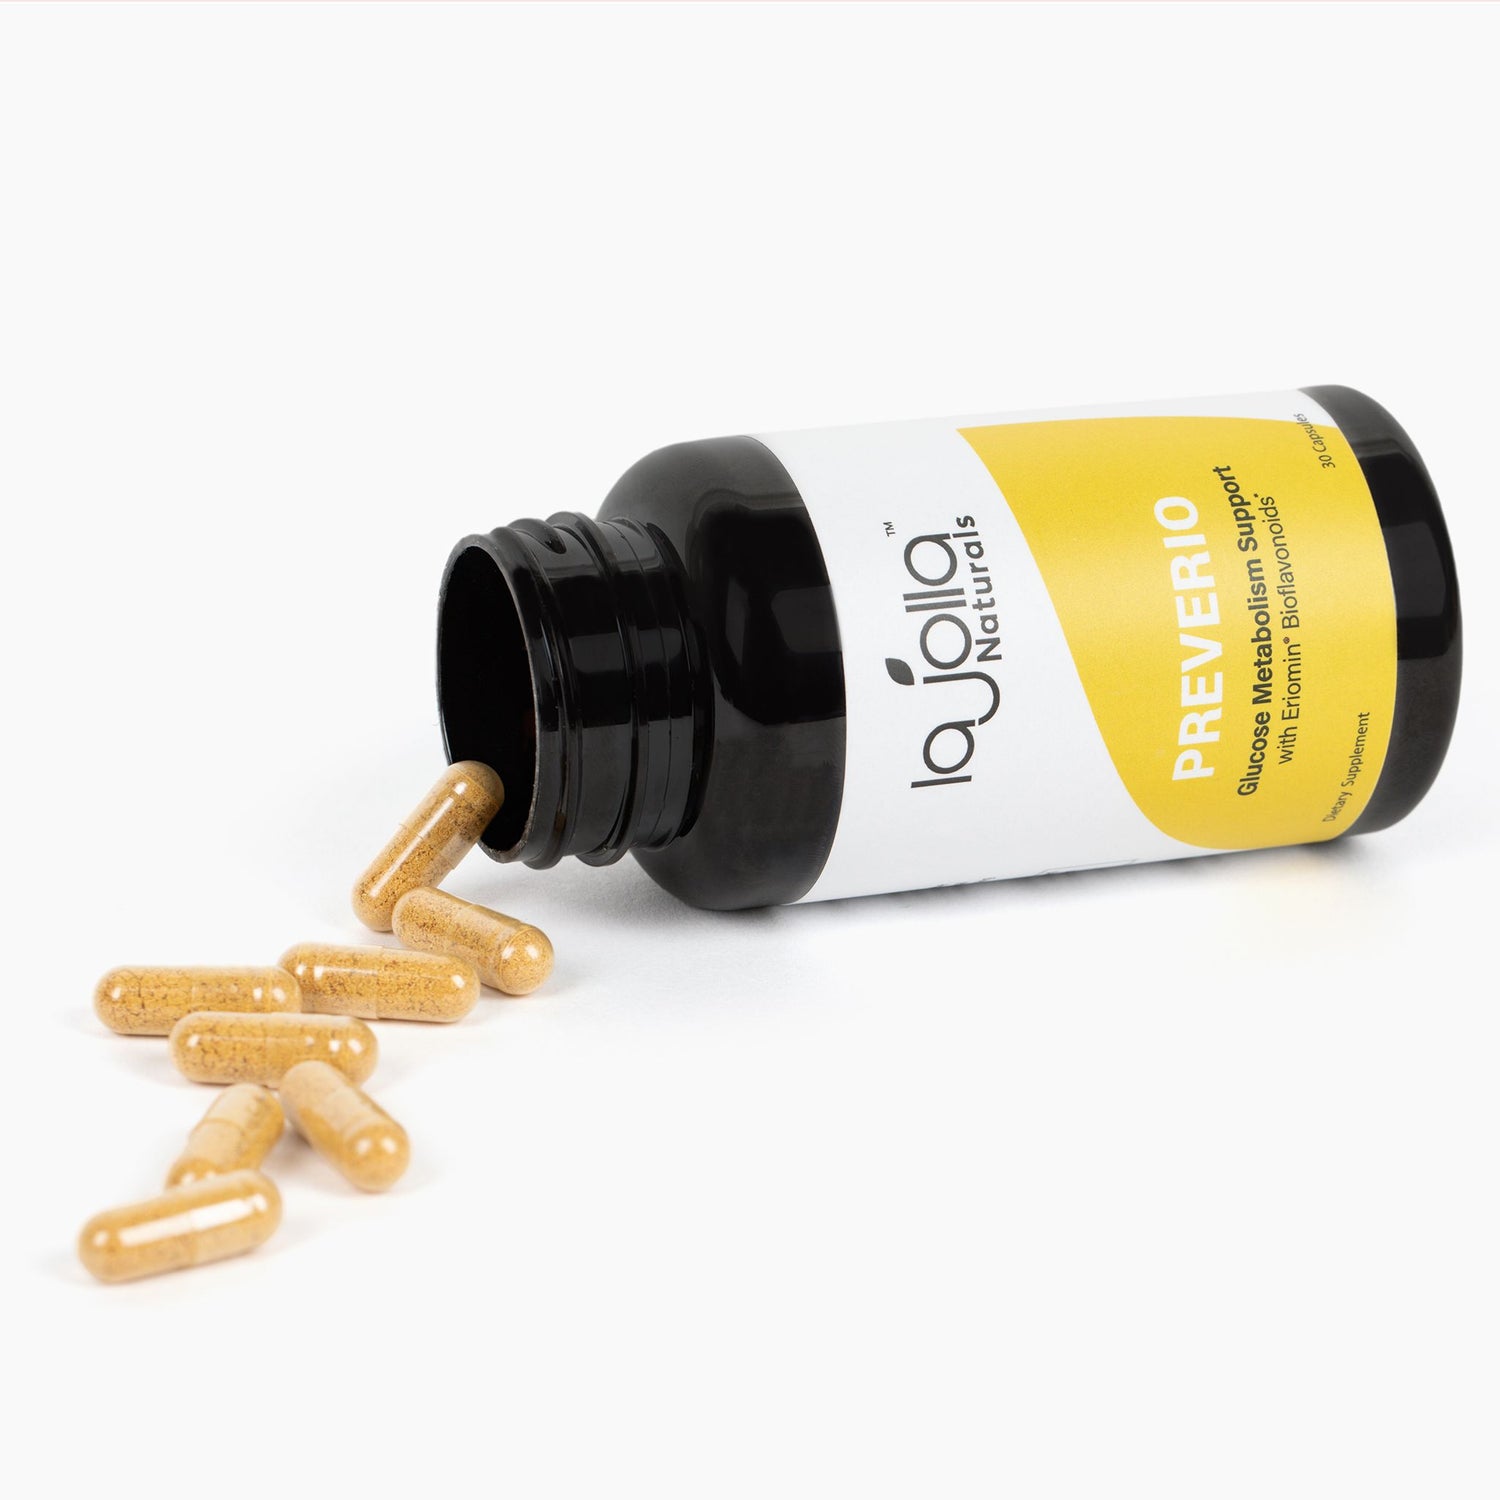 Bottle of Preverio Glucose Metabolism Support on its side with capsules spilling out